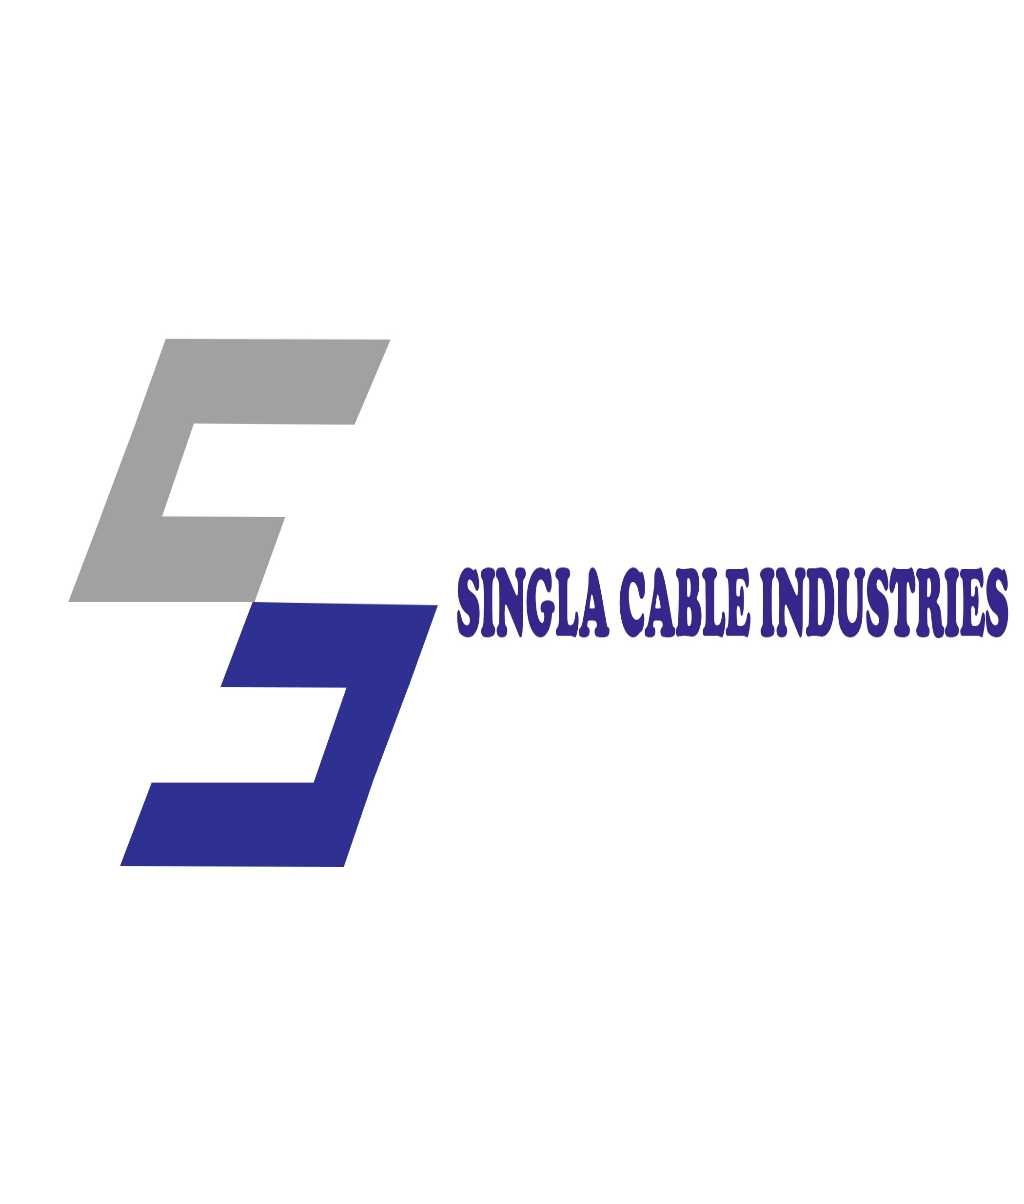 Singla Cable Industries